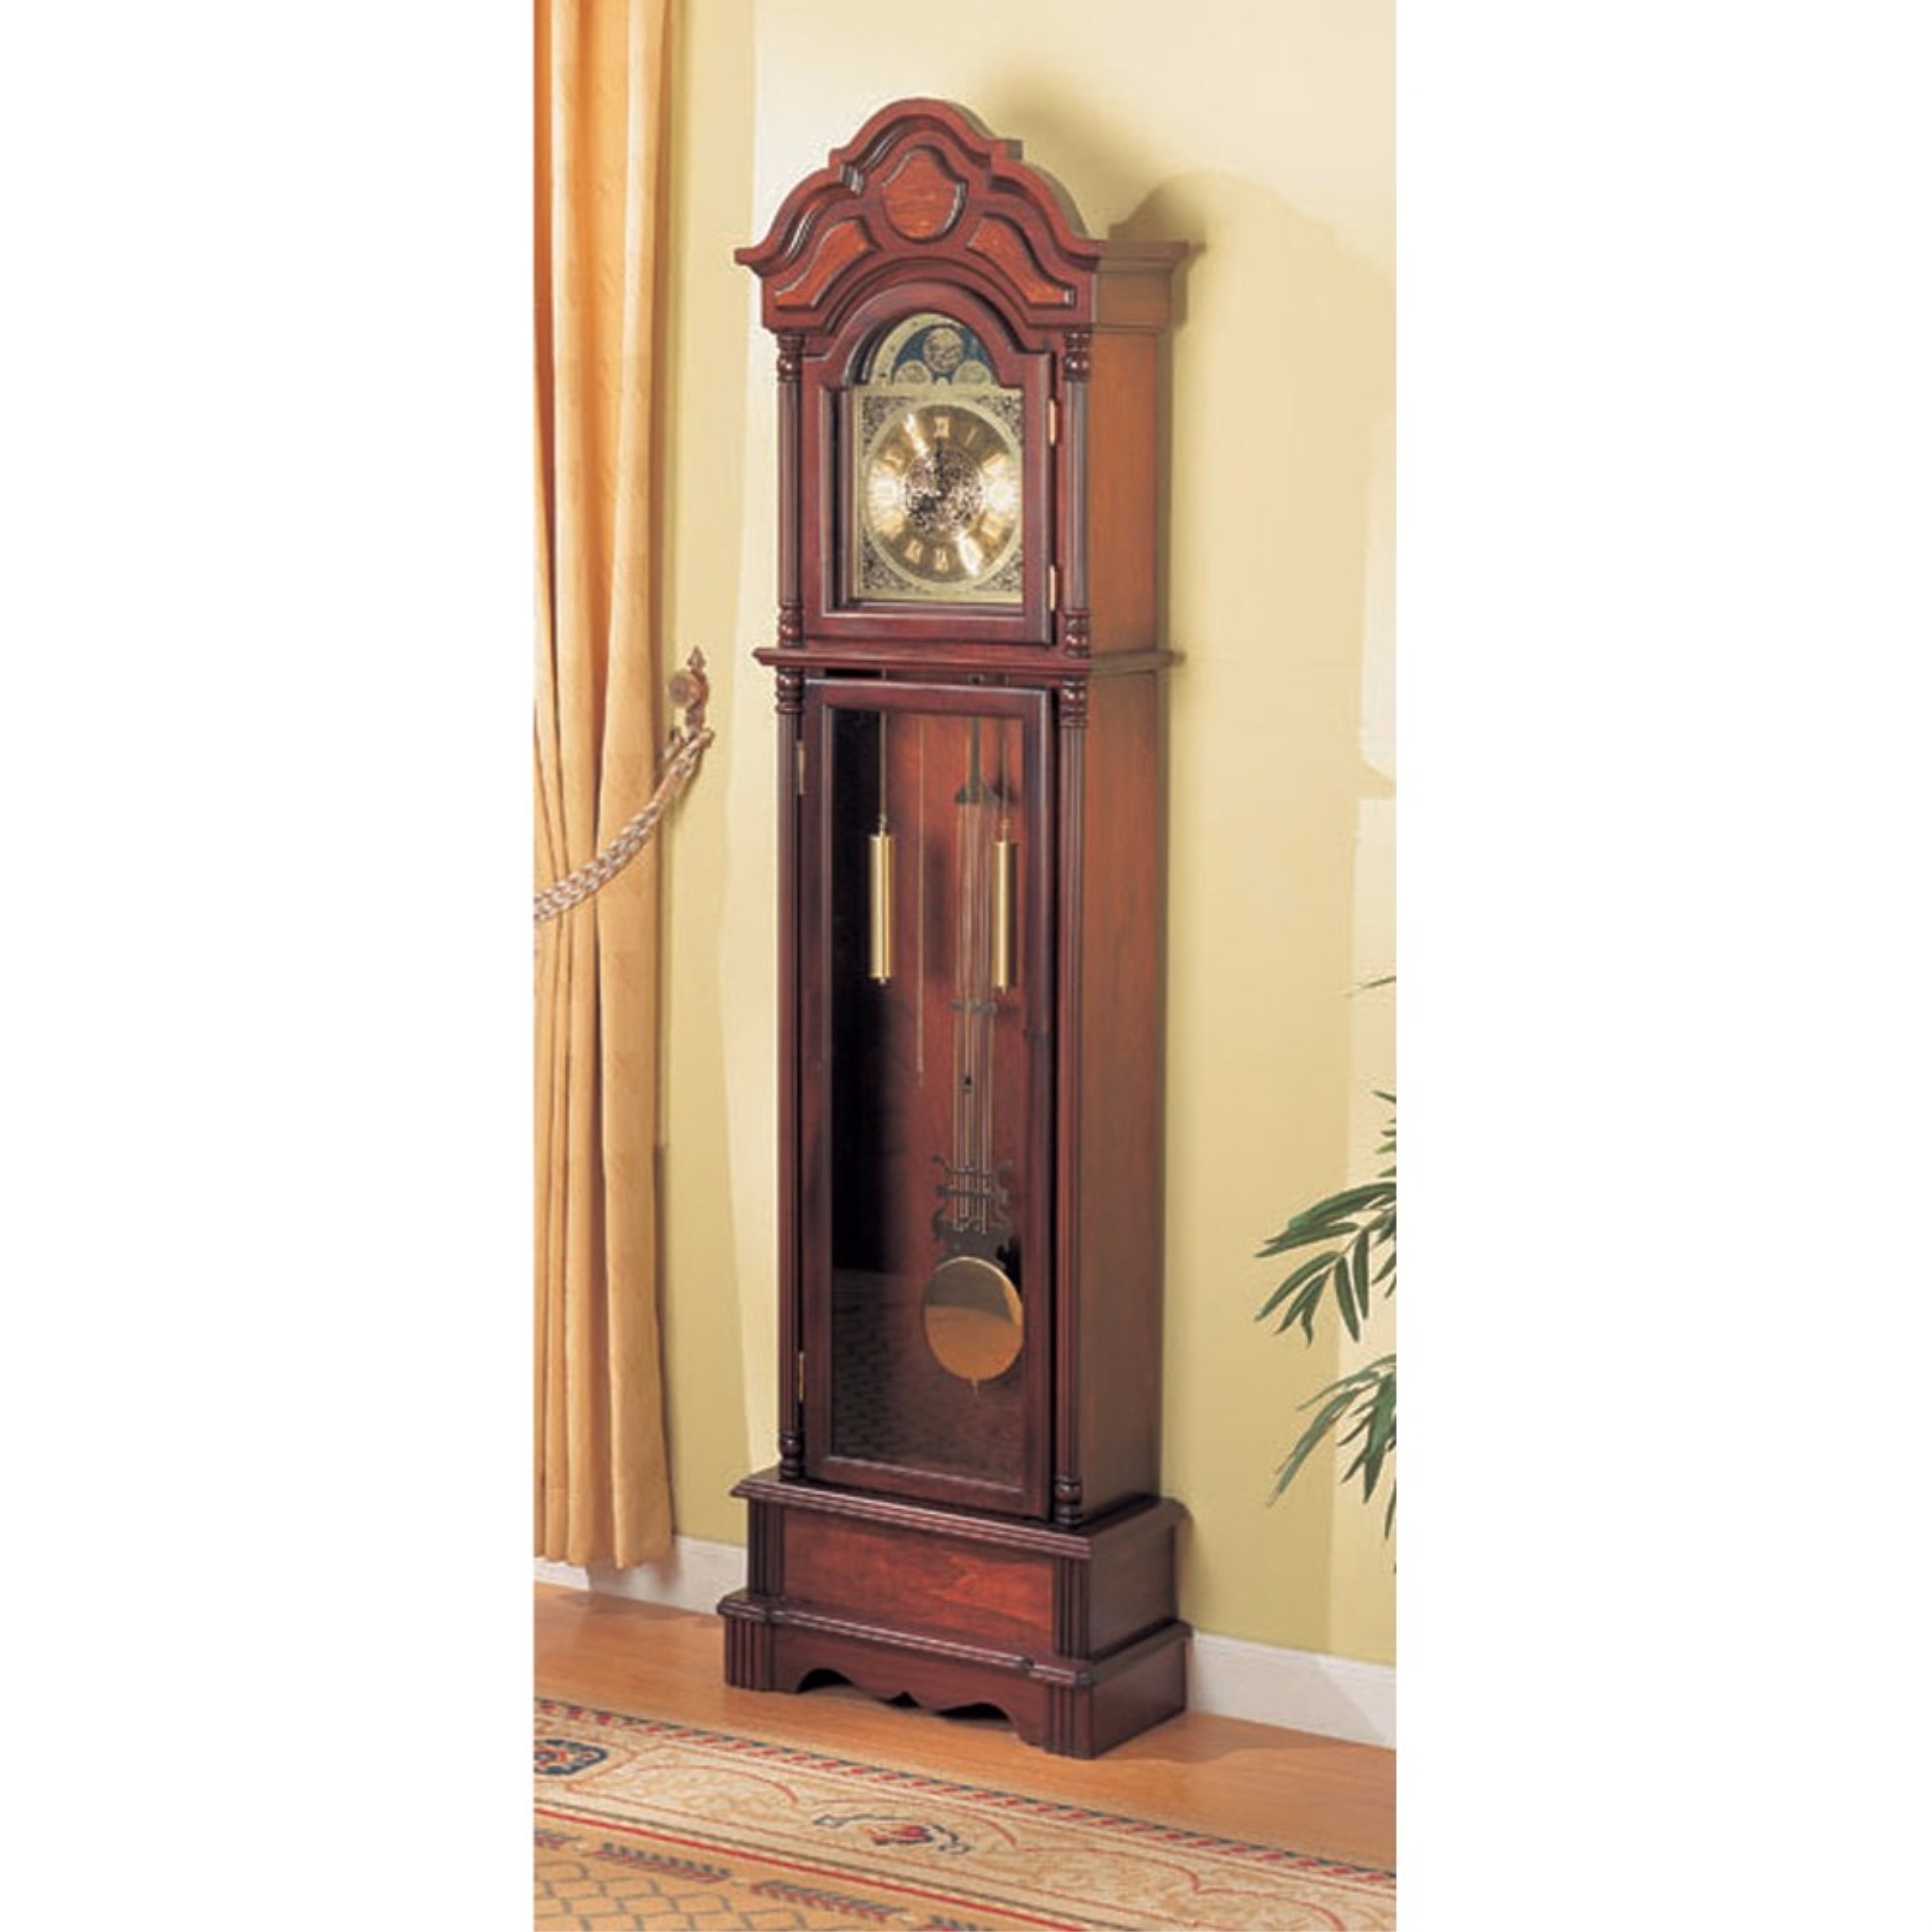 Benzara Old style Wooden Grandfather Clock with Chime, Brown